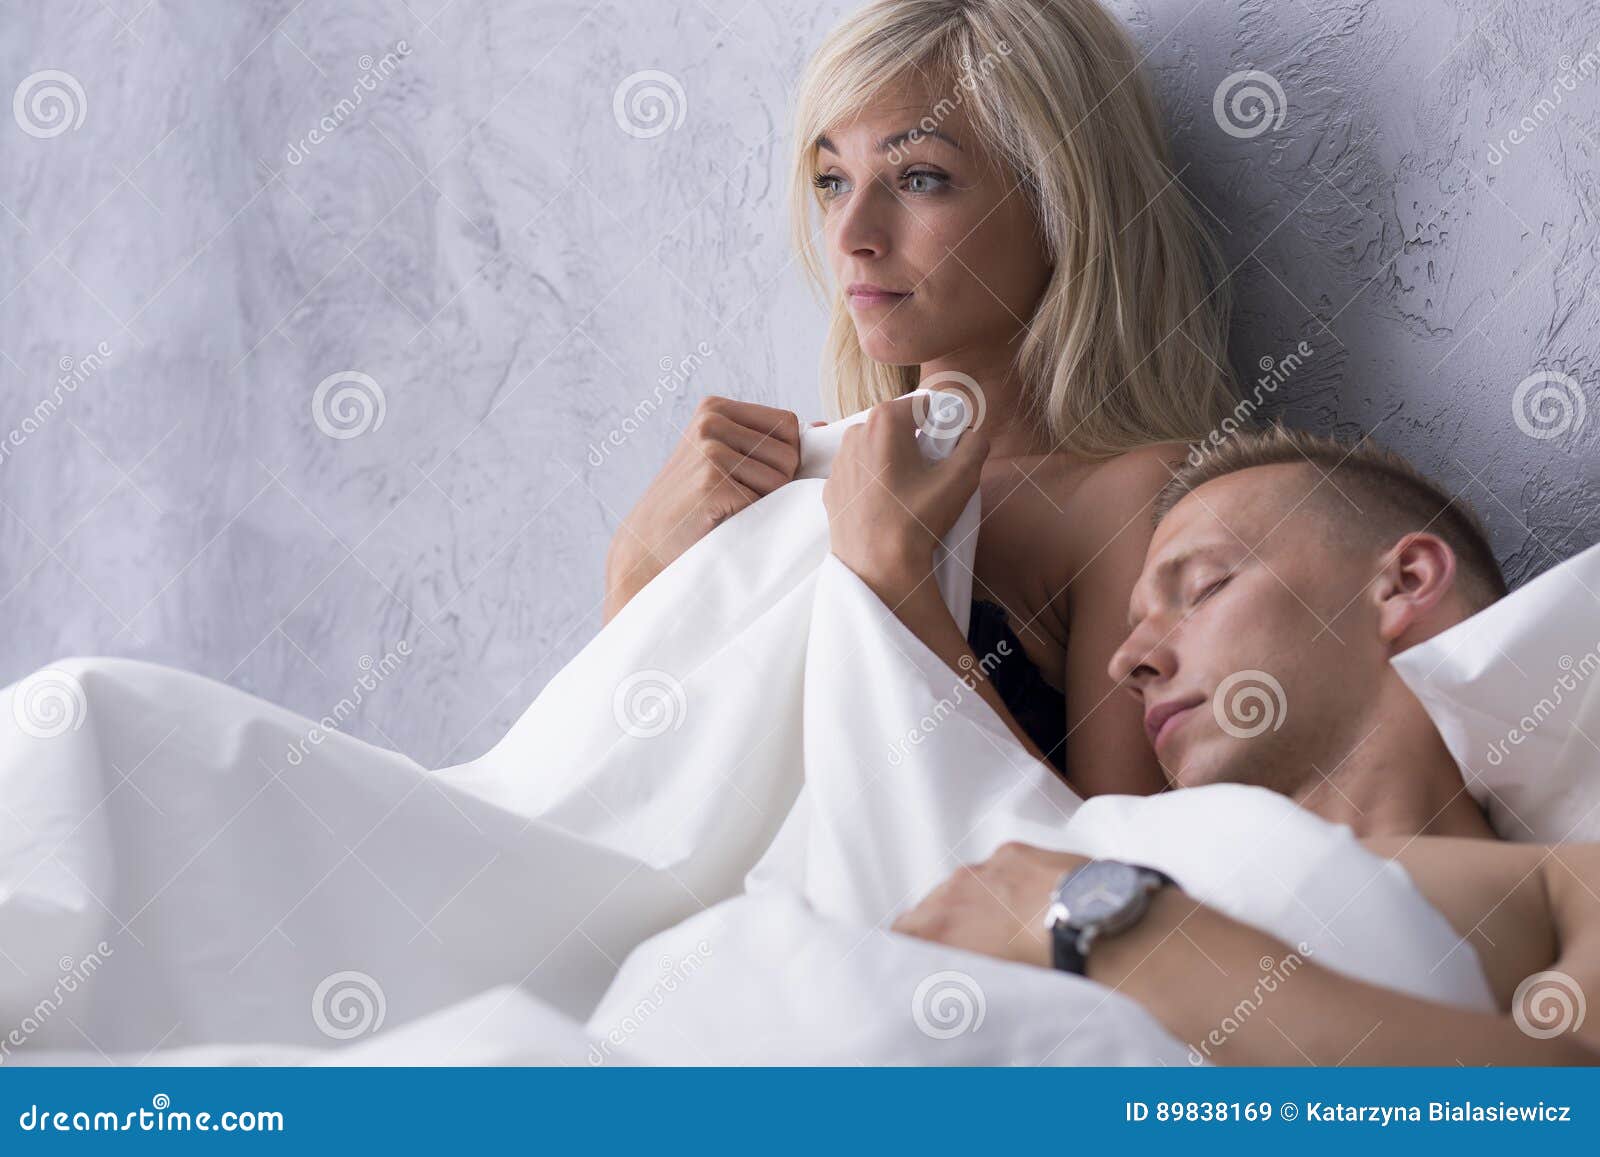 Naked man and woman in bed stock image photo